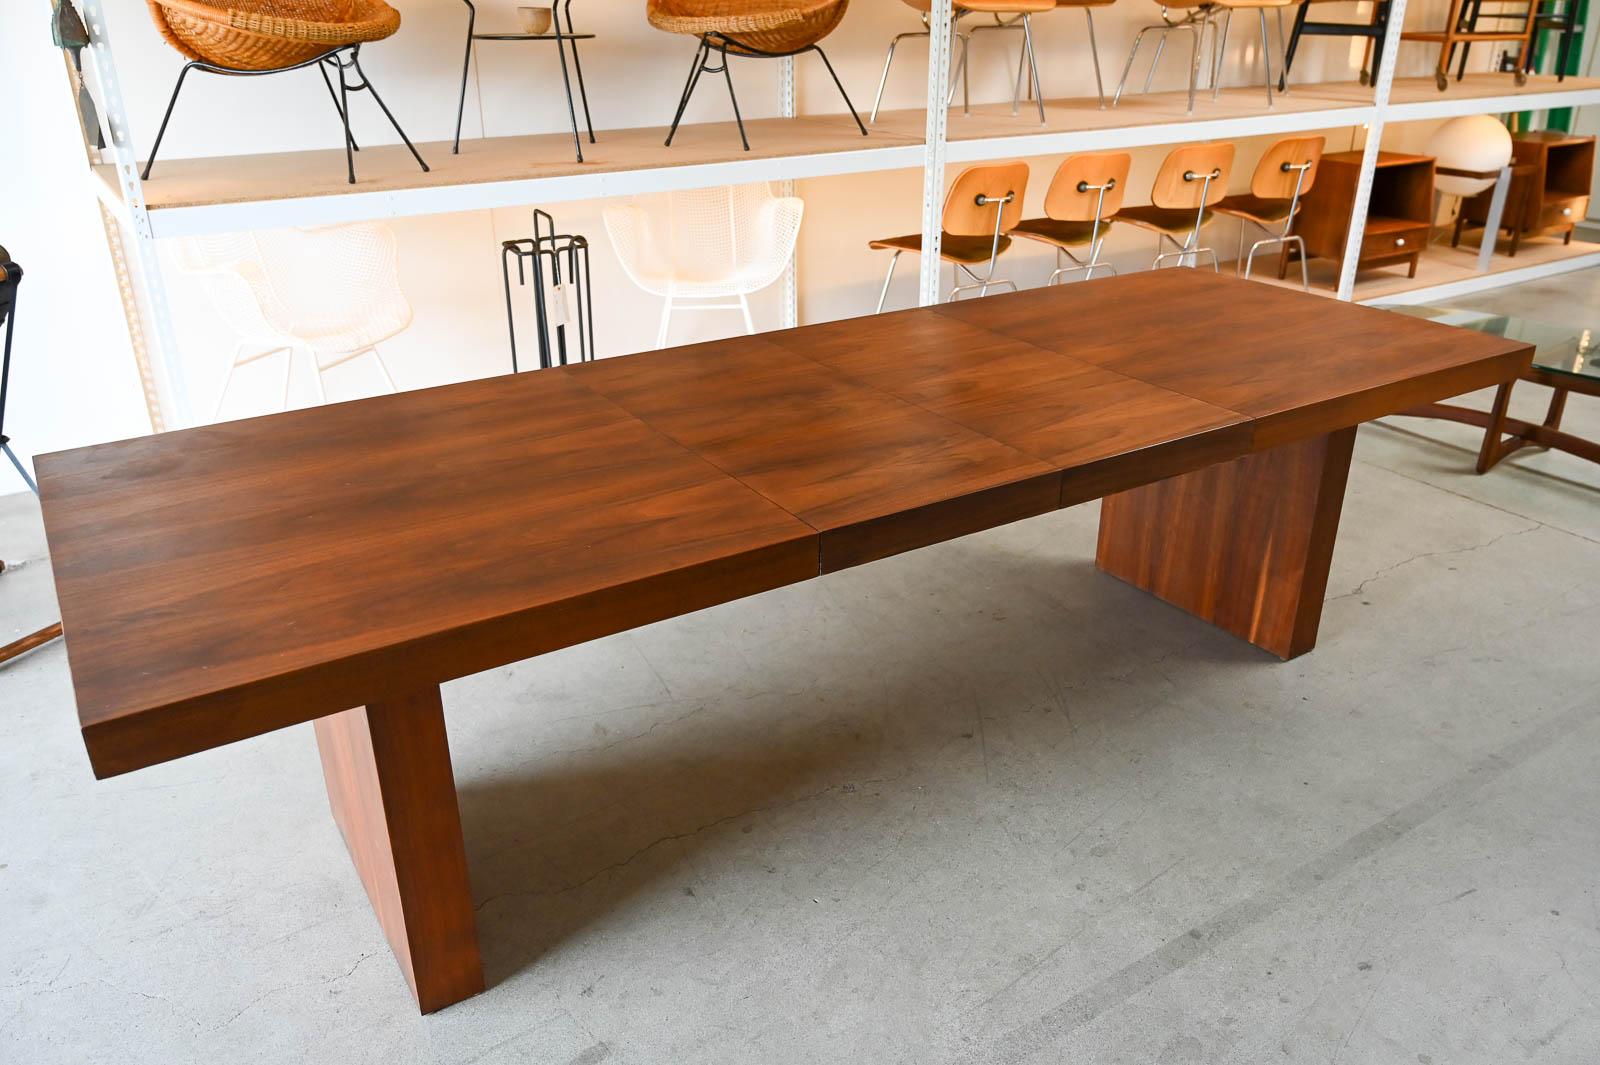 Walnut Dining Table by Merton Gershun for Dillingham Esprit Collection, ca. 1970.  Beautiful walnut slab dining or conference table with book matched walnut leaves in very good original condition with hardly any wear.  The leaves are removable